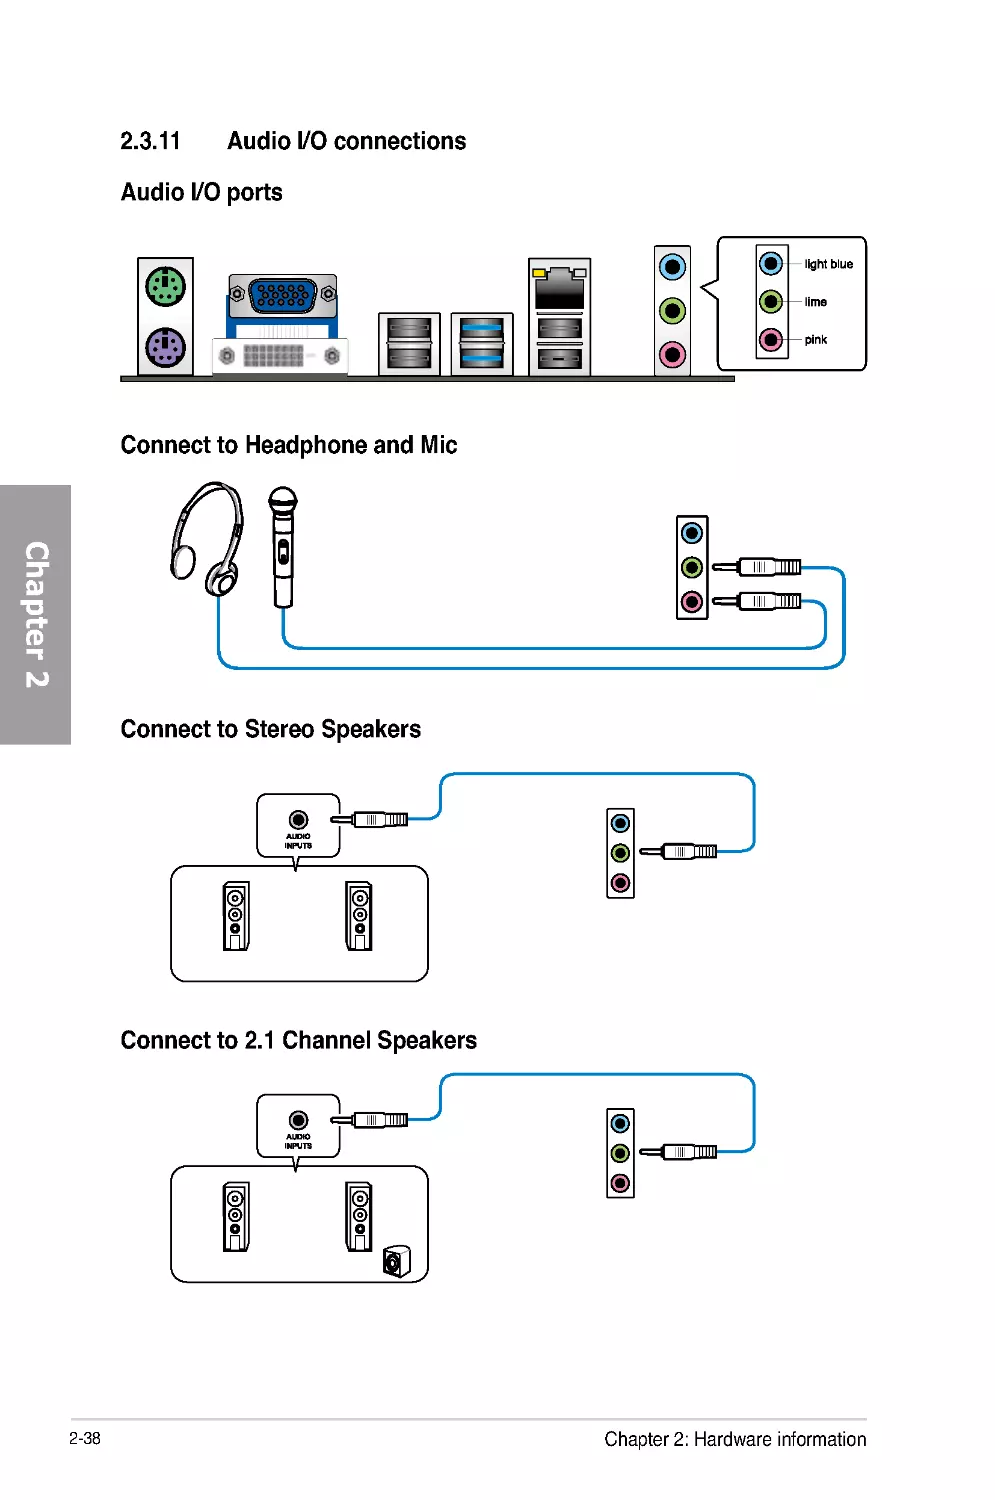 2.3.11	Audio I/O connections